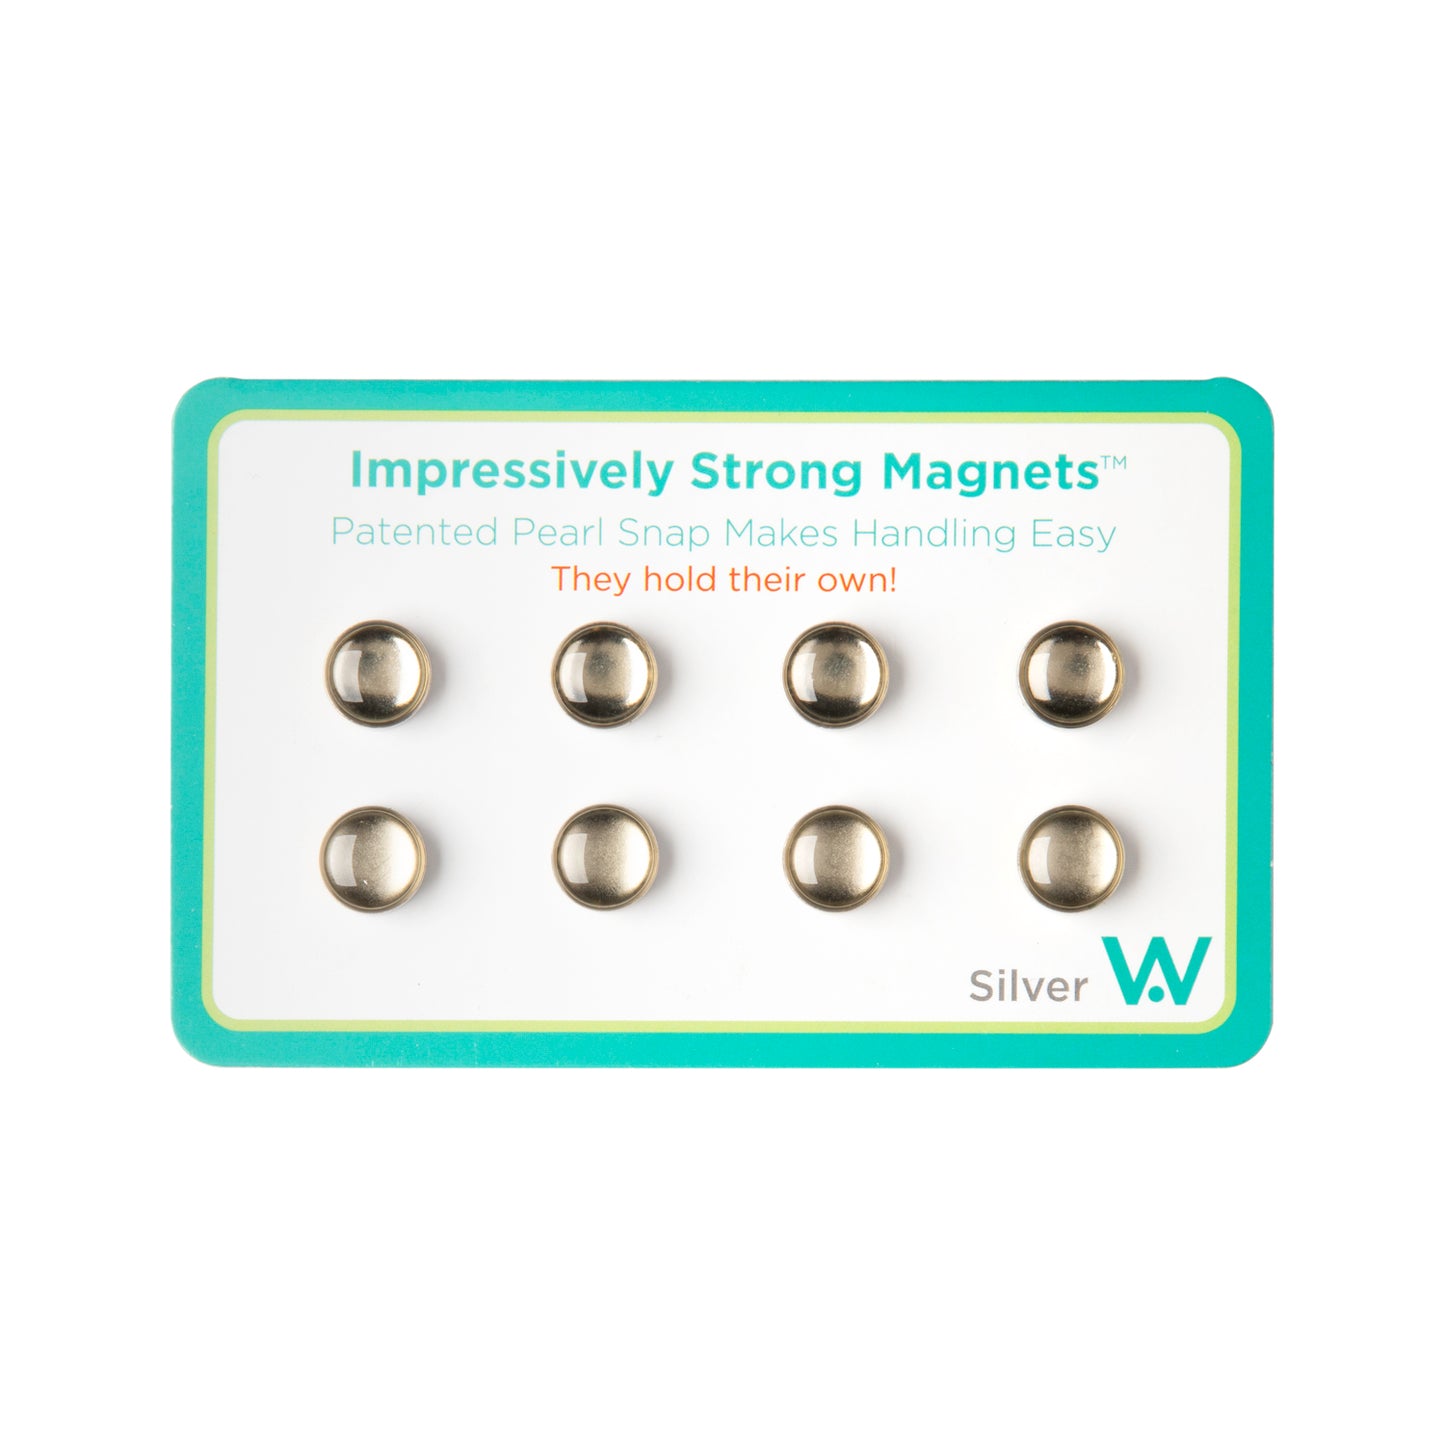 CASE of 20 packs Impressively Strong Magnets (Retail box of 8pc each)